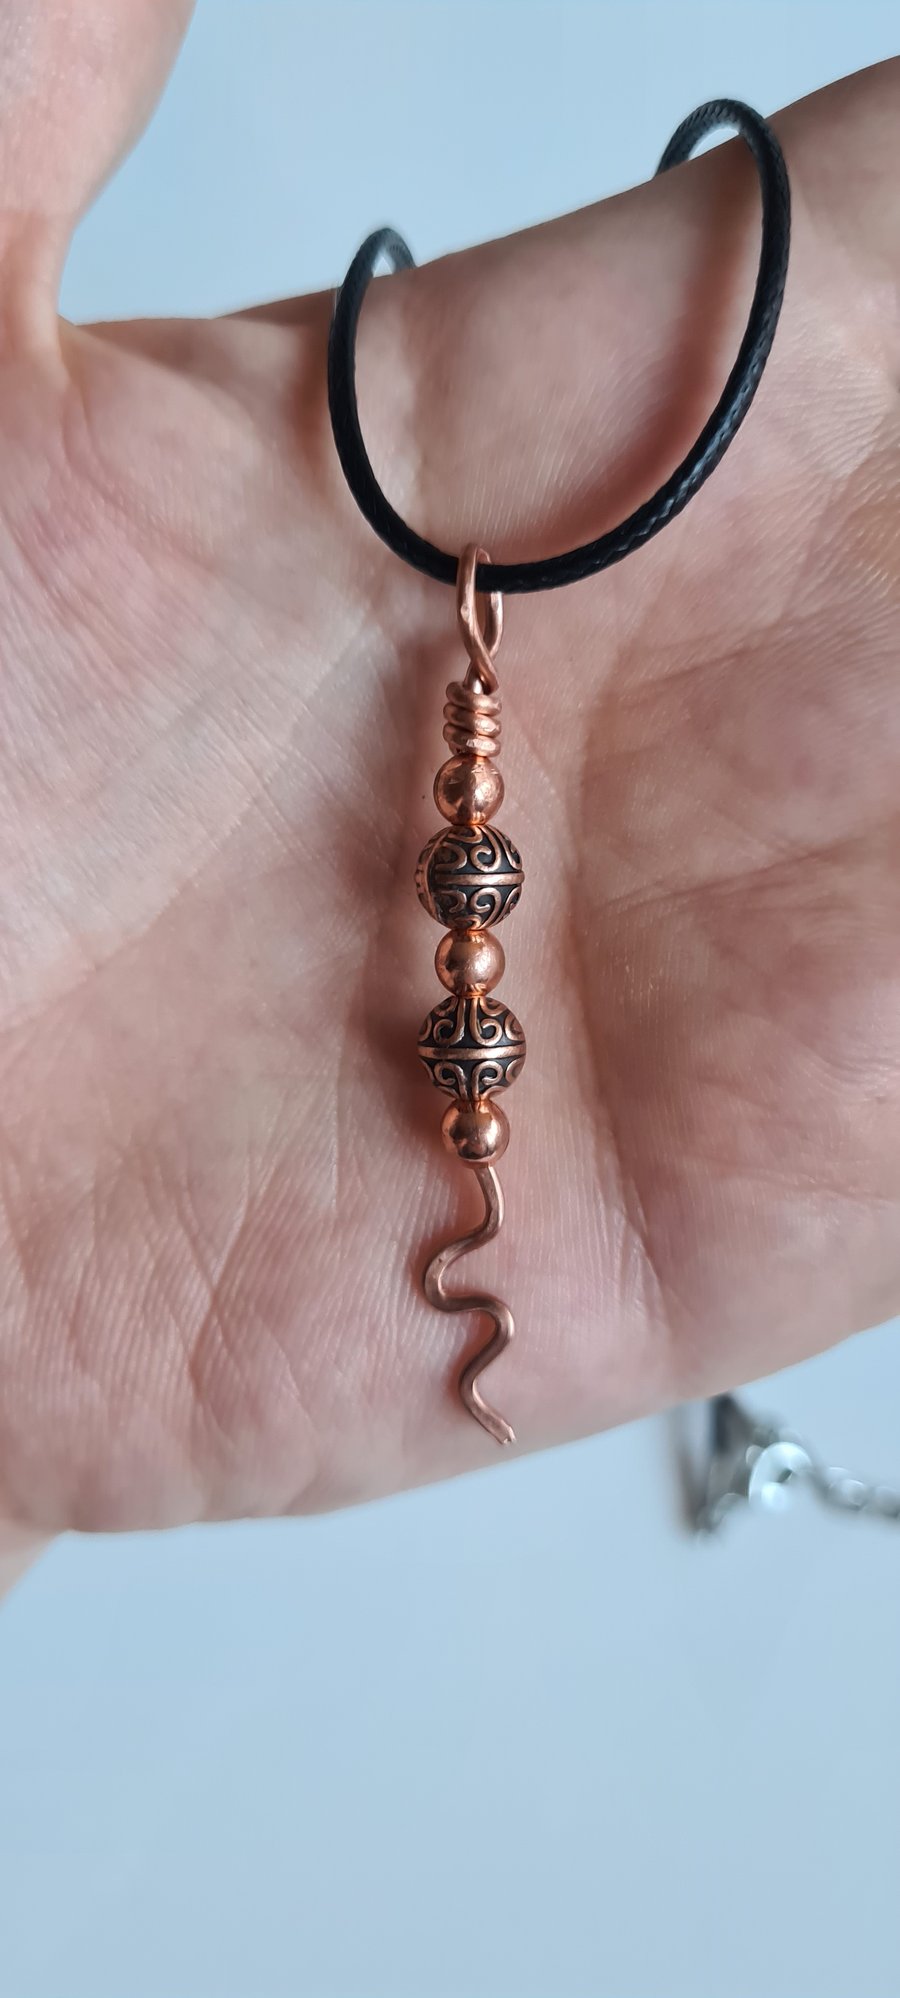 Handmade Beautiful Copper Beaded Pendant Necklace on Black Cord Gift Boxed